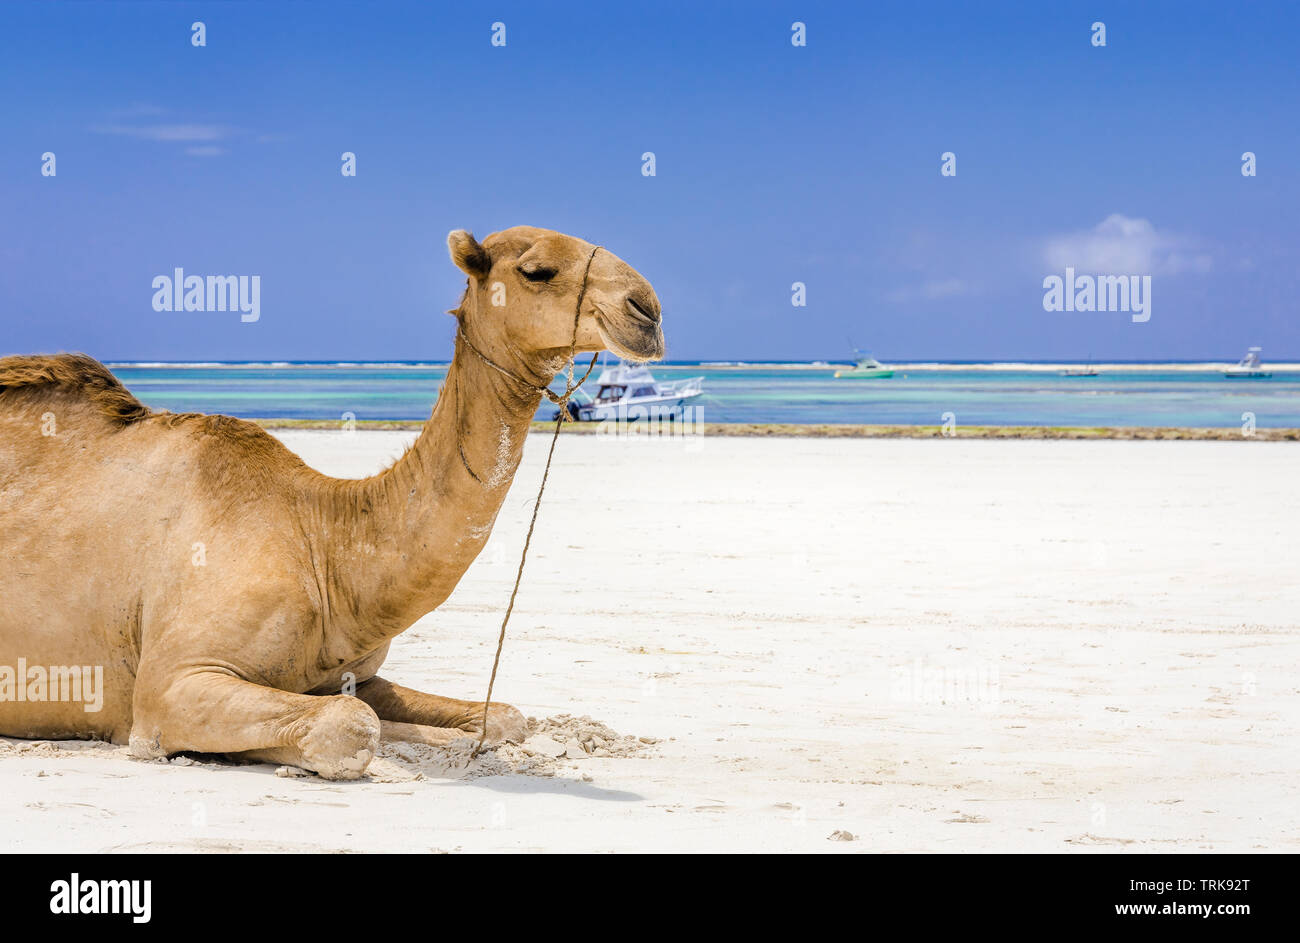 Camel and Diani beach seascape with turquoise Indian Ocean,  Kenya Stock Photo